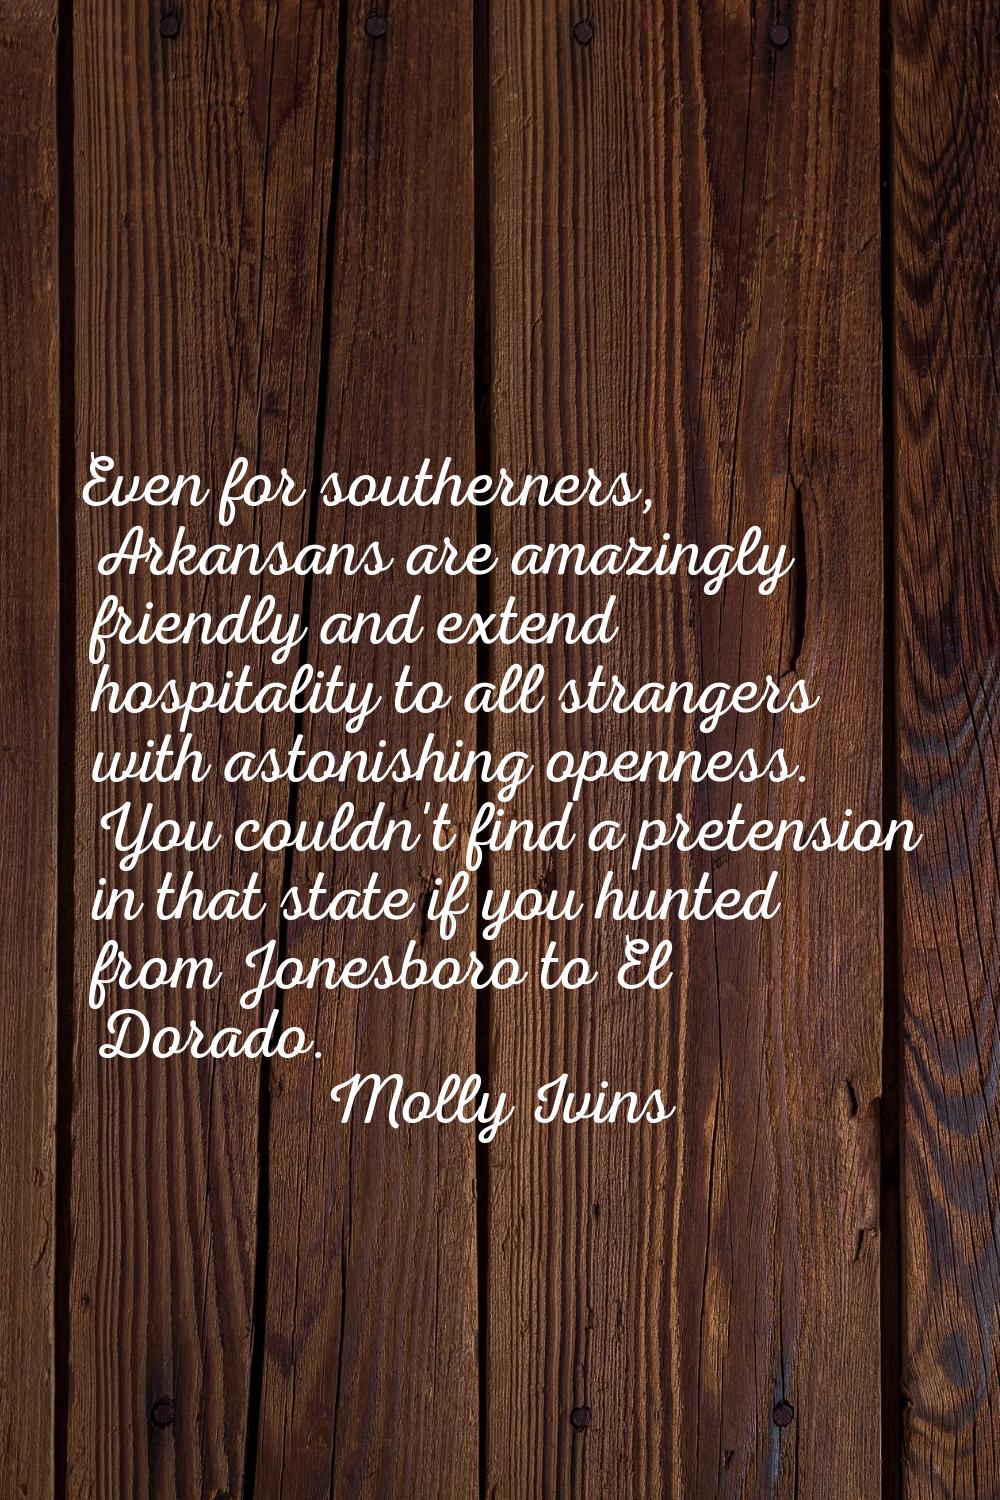 Even for southerners, Arkansans are amazingly friendly and extend hospitality to all strangers with